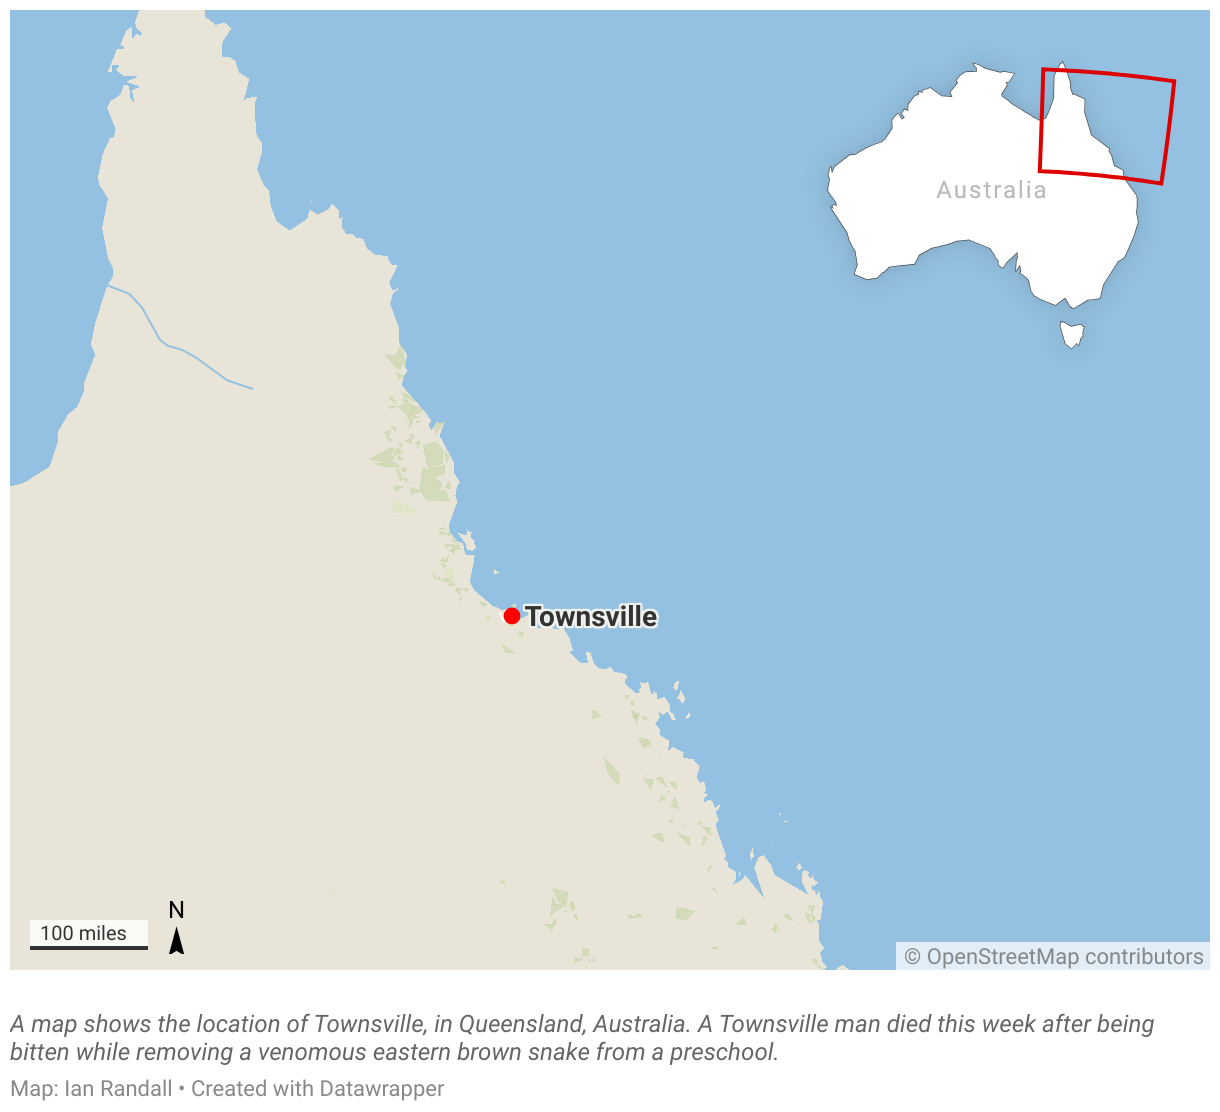 A map shows the location of Townsville, in Queensland, Australia.